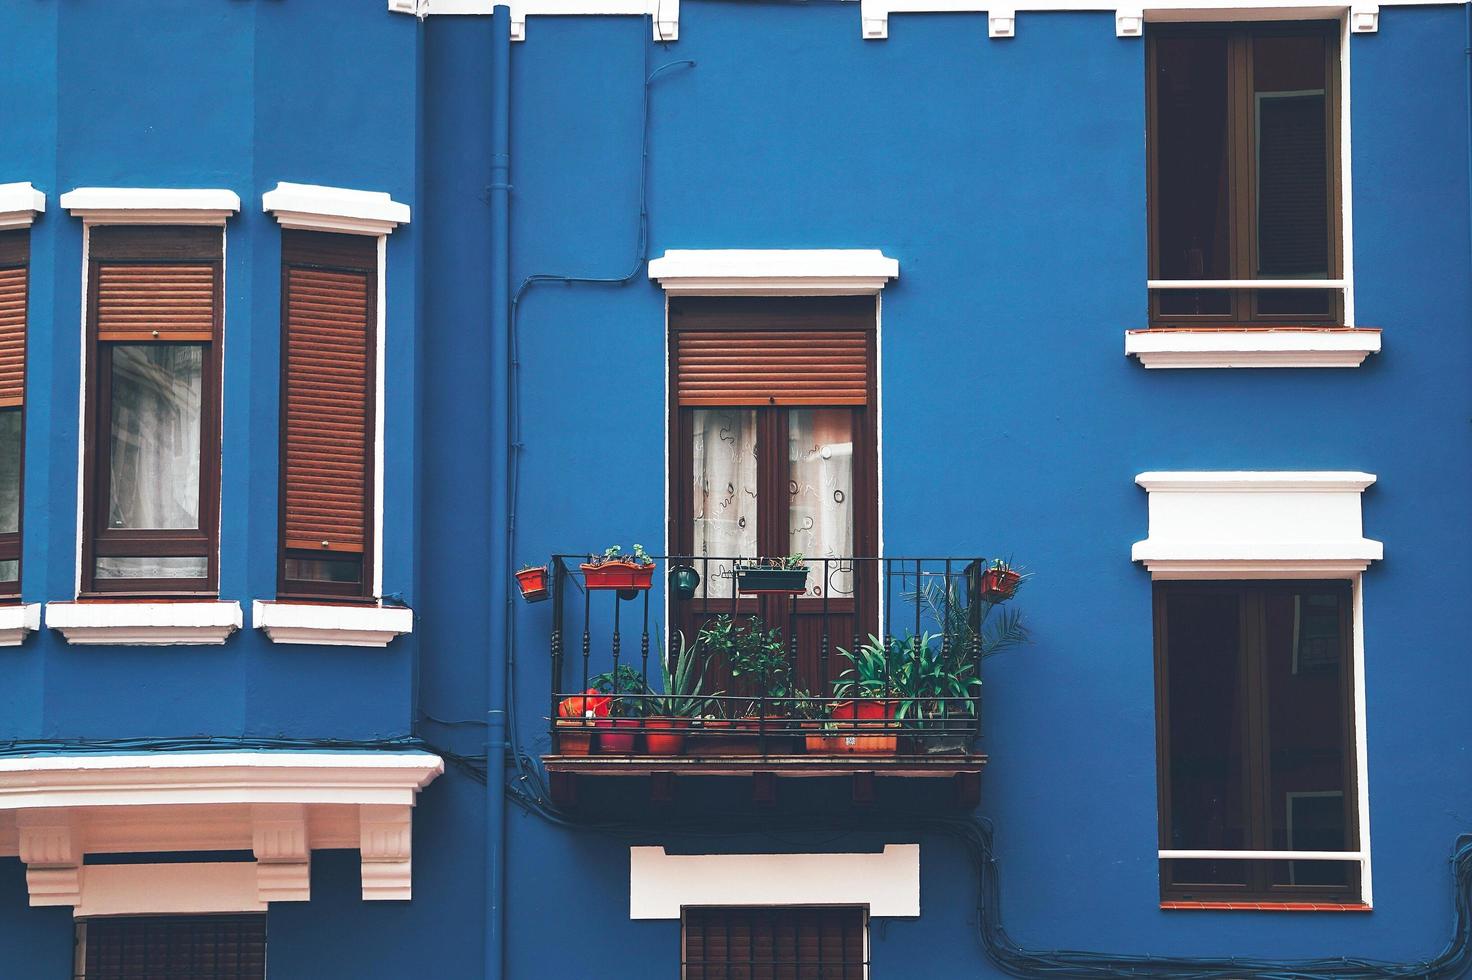 Window on the blue facade of the building in Bilbao city, Spain photo